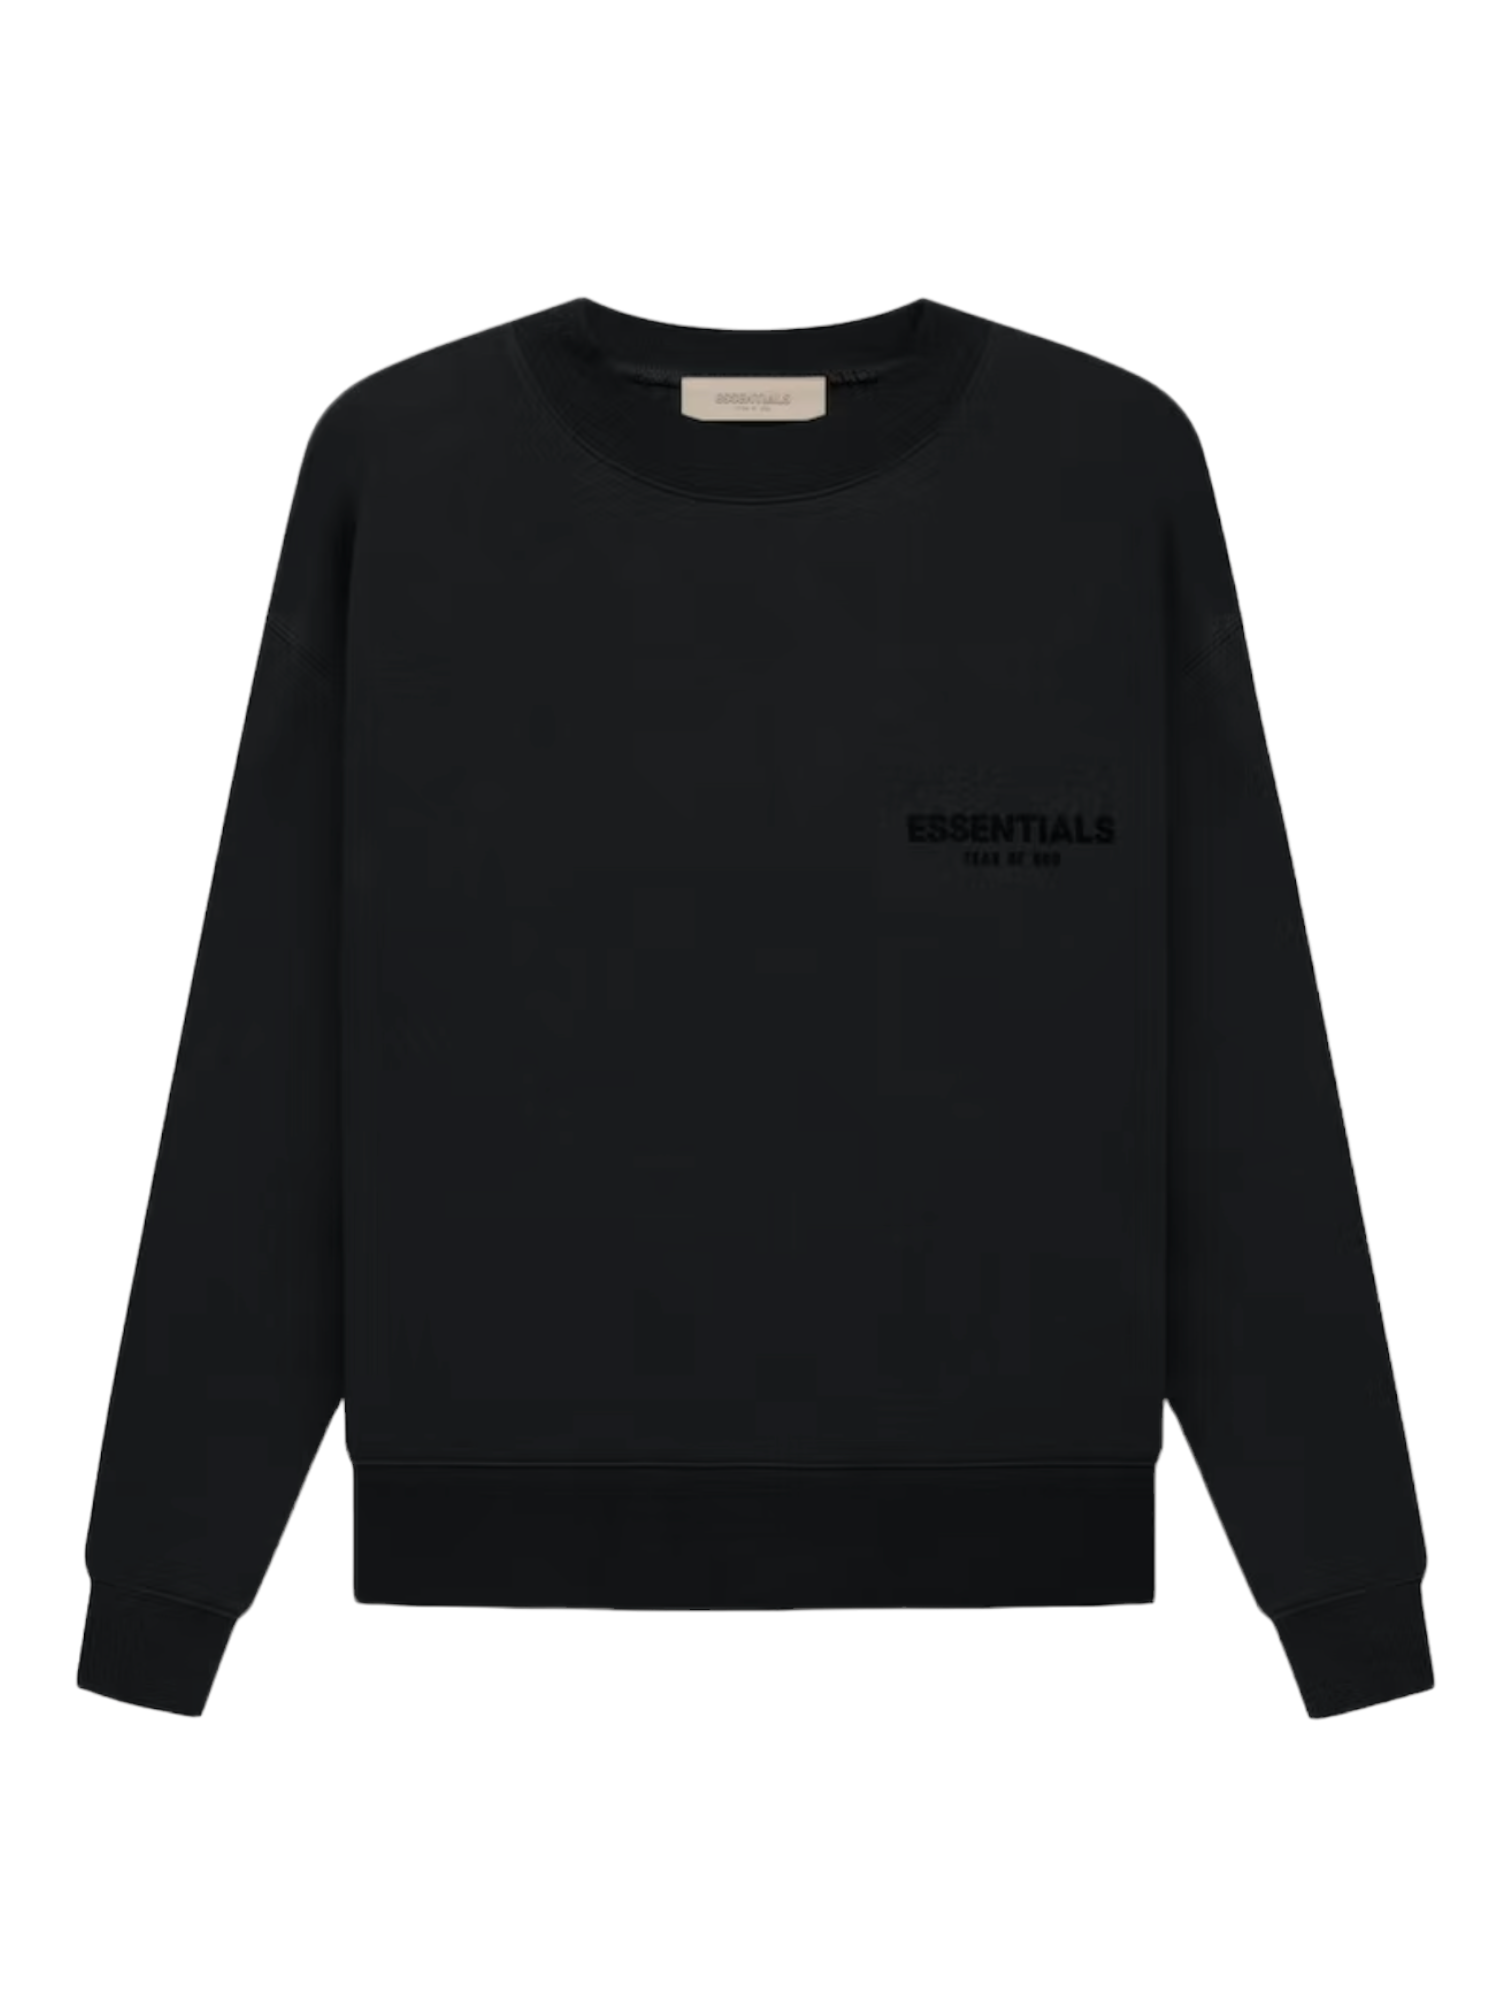 Essentials Fear of God Stretch Limo Black Crewneck Sweatshirt SS22 - Genuine Design Luxury Consignment Calgary, Canada New & Pre-Owned Authentic Clothing, Shoes, Accessories.